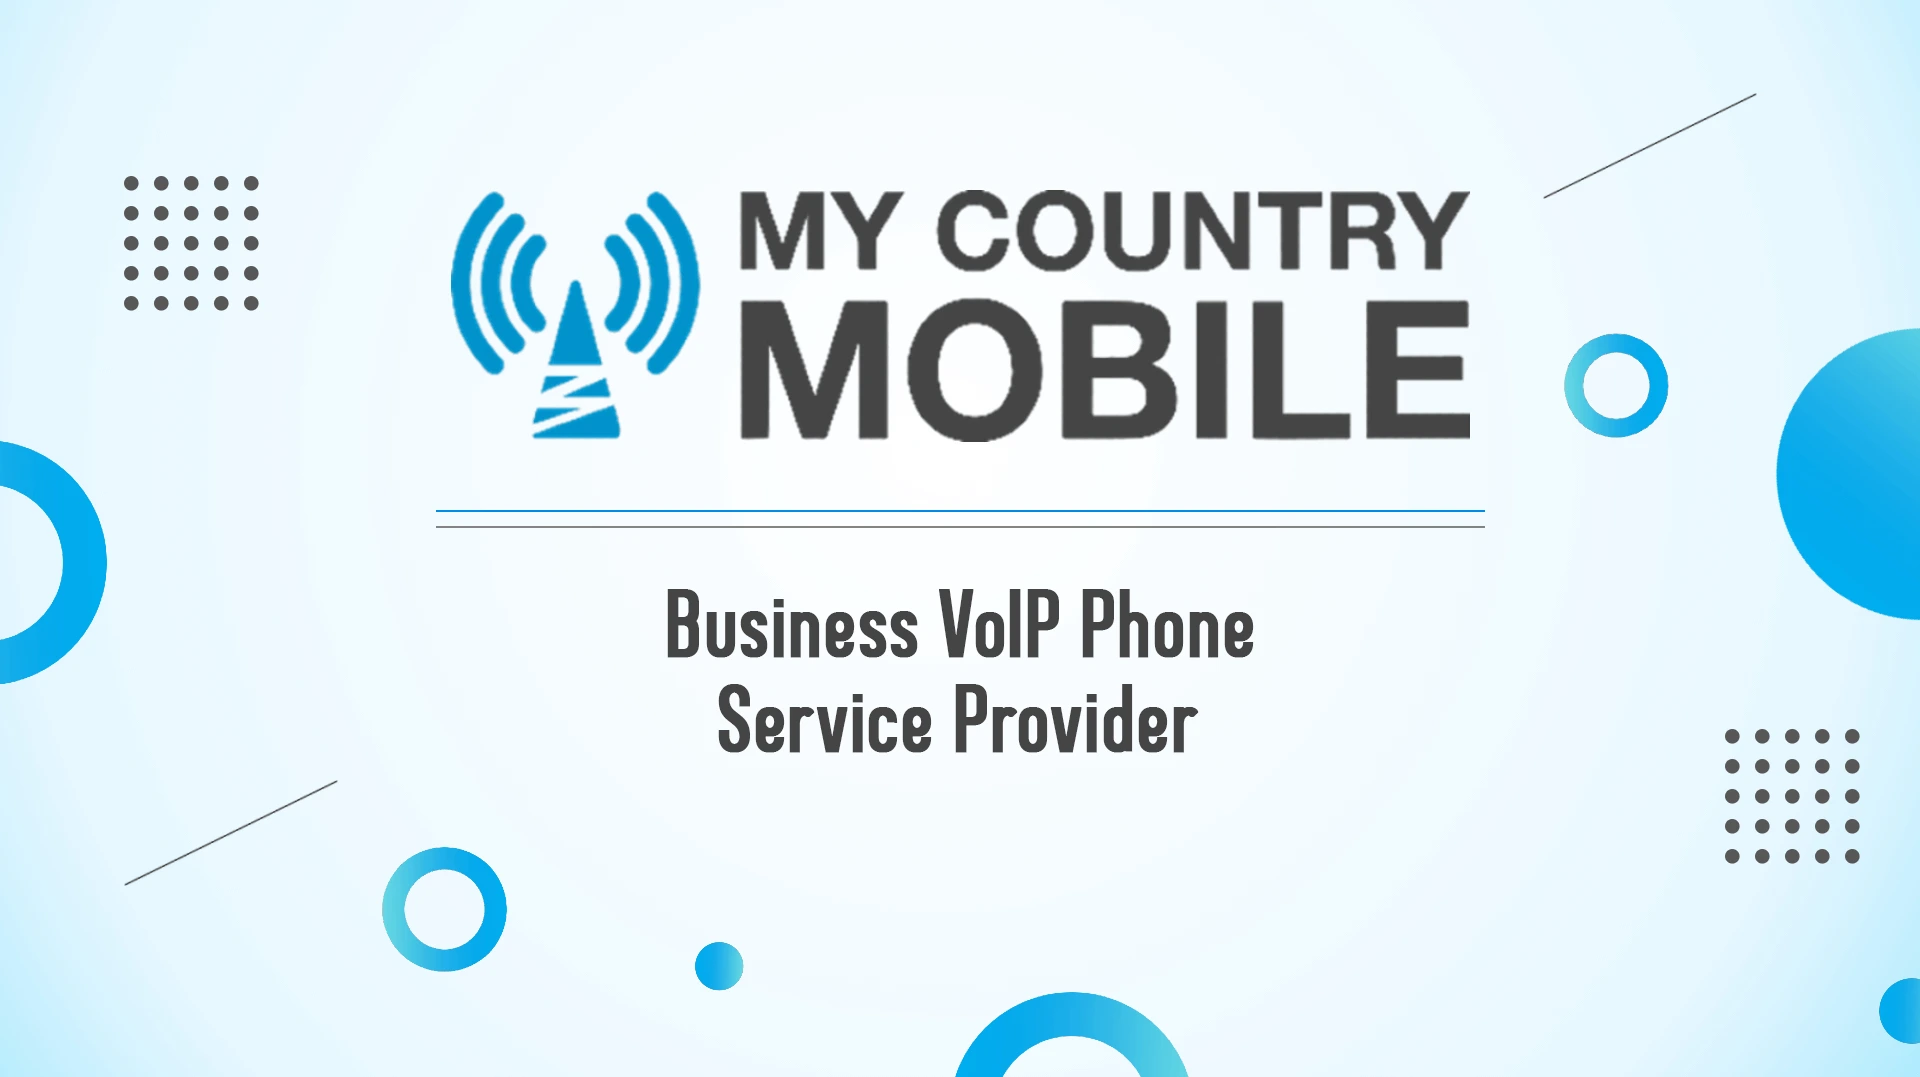 Business VoIP Phone Service Provider